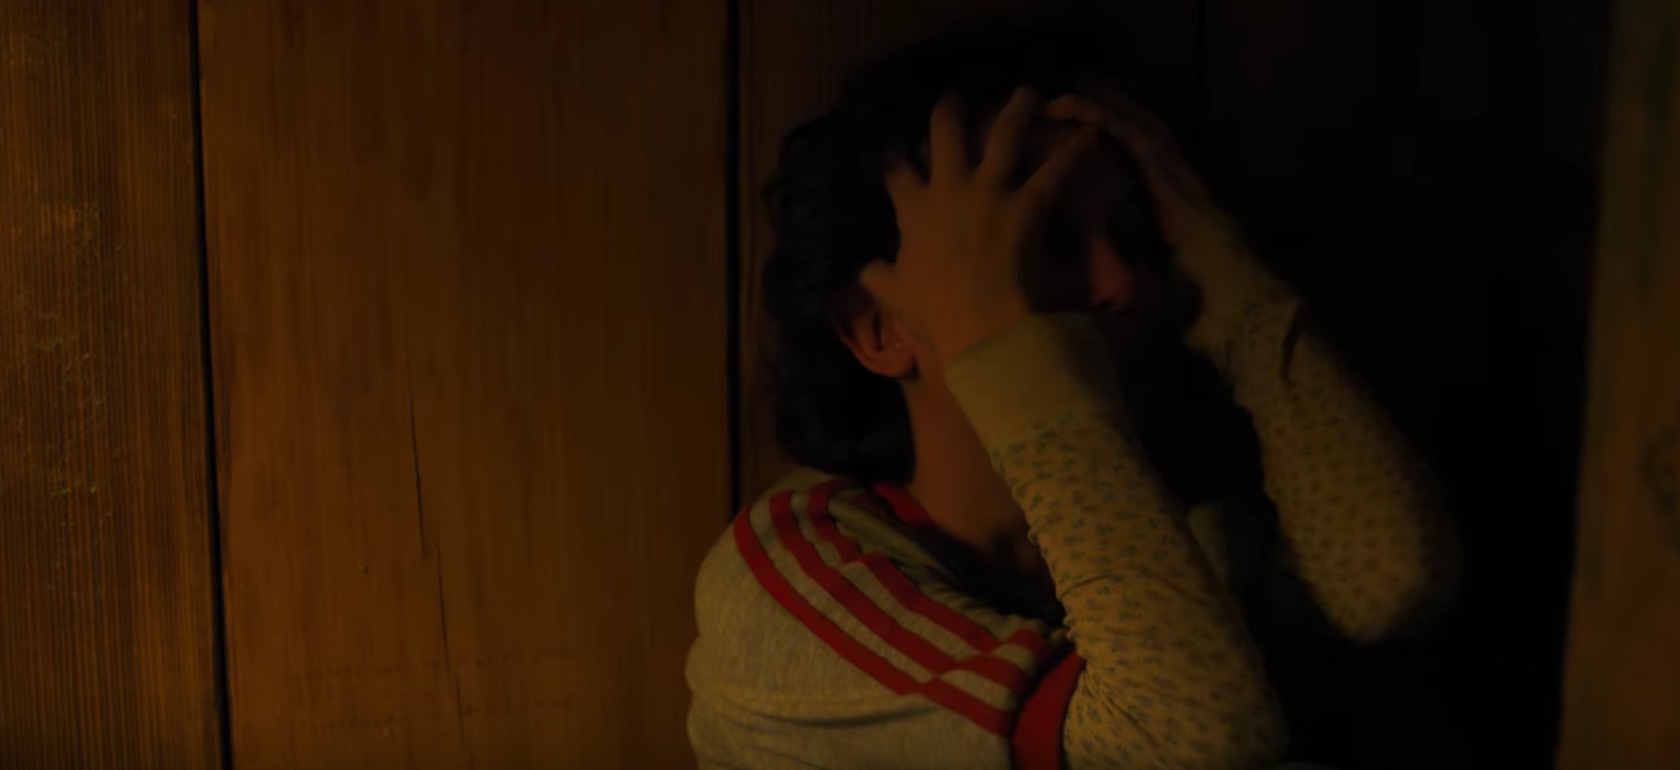 Let’s Read Way Too Much Into The First Stranger Things Season Two Footage